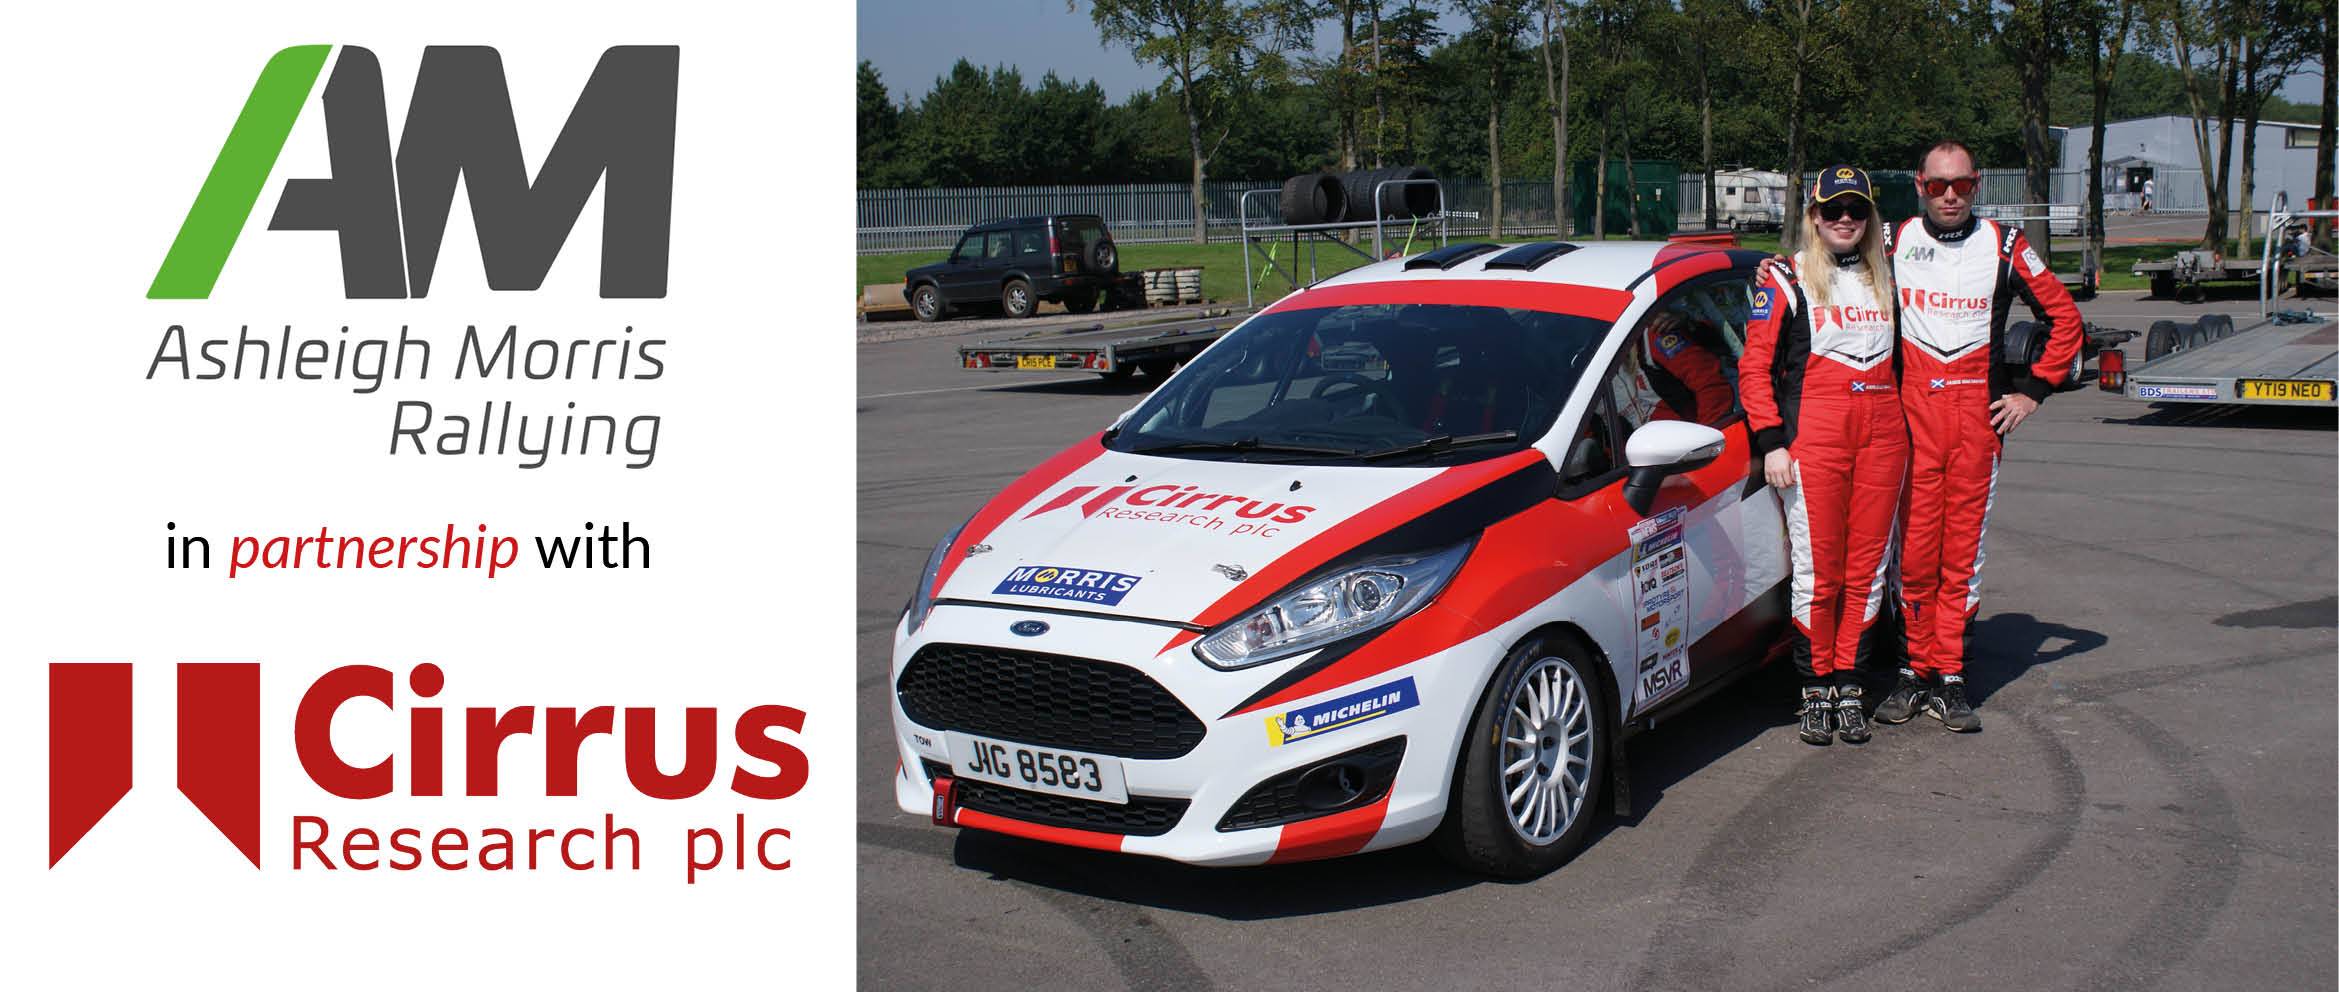 Ashleigh Morris Rallying partners with Cirrus Research for the 2019/20 MSN Championship